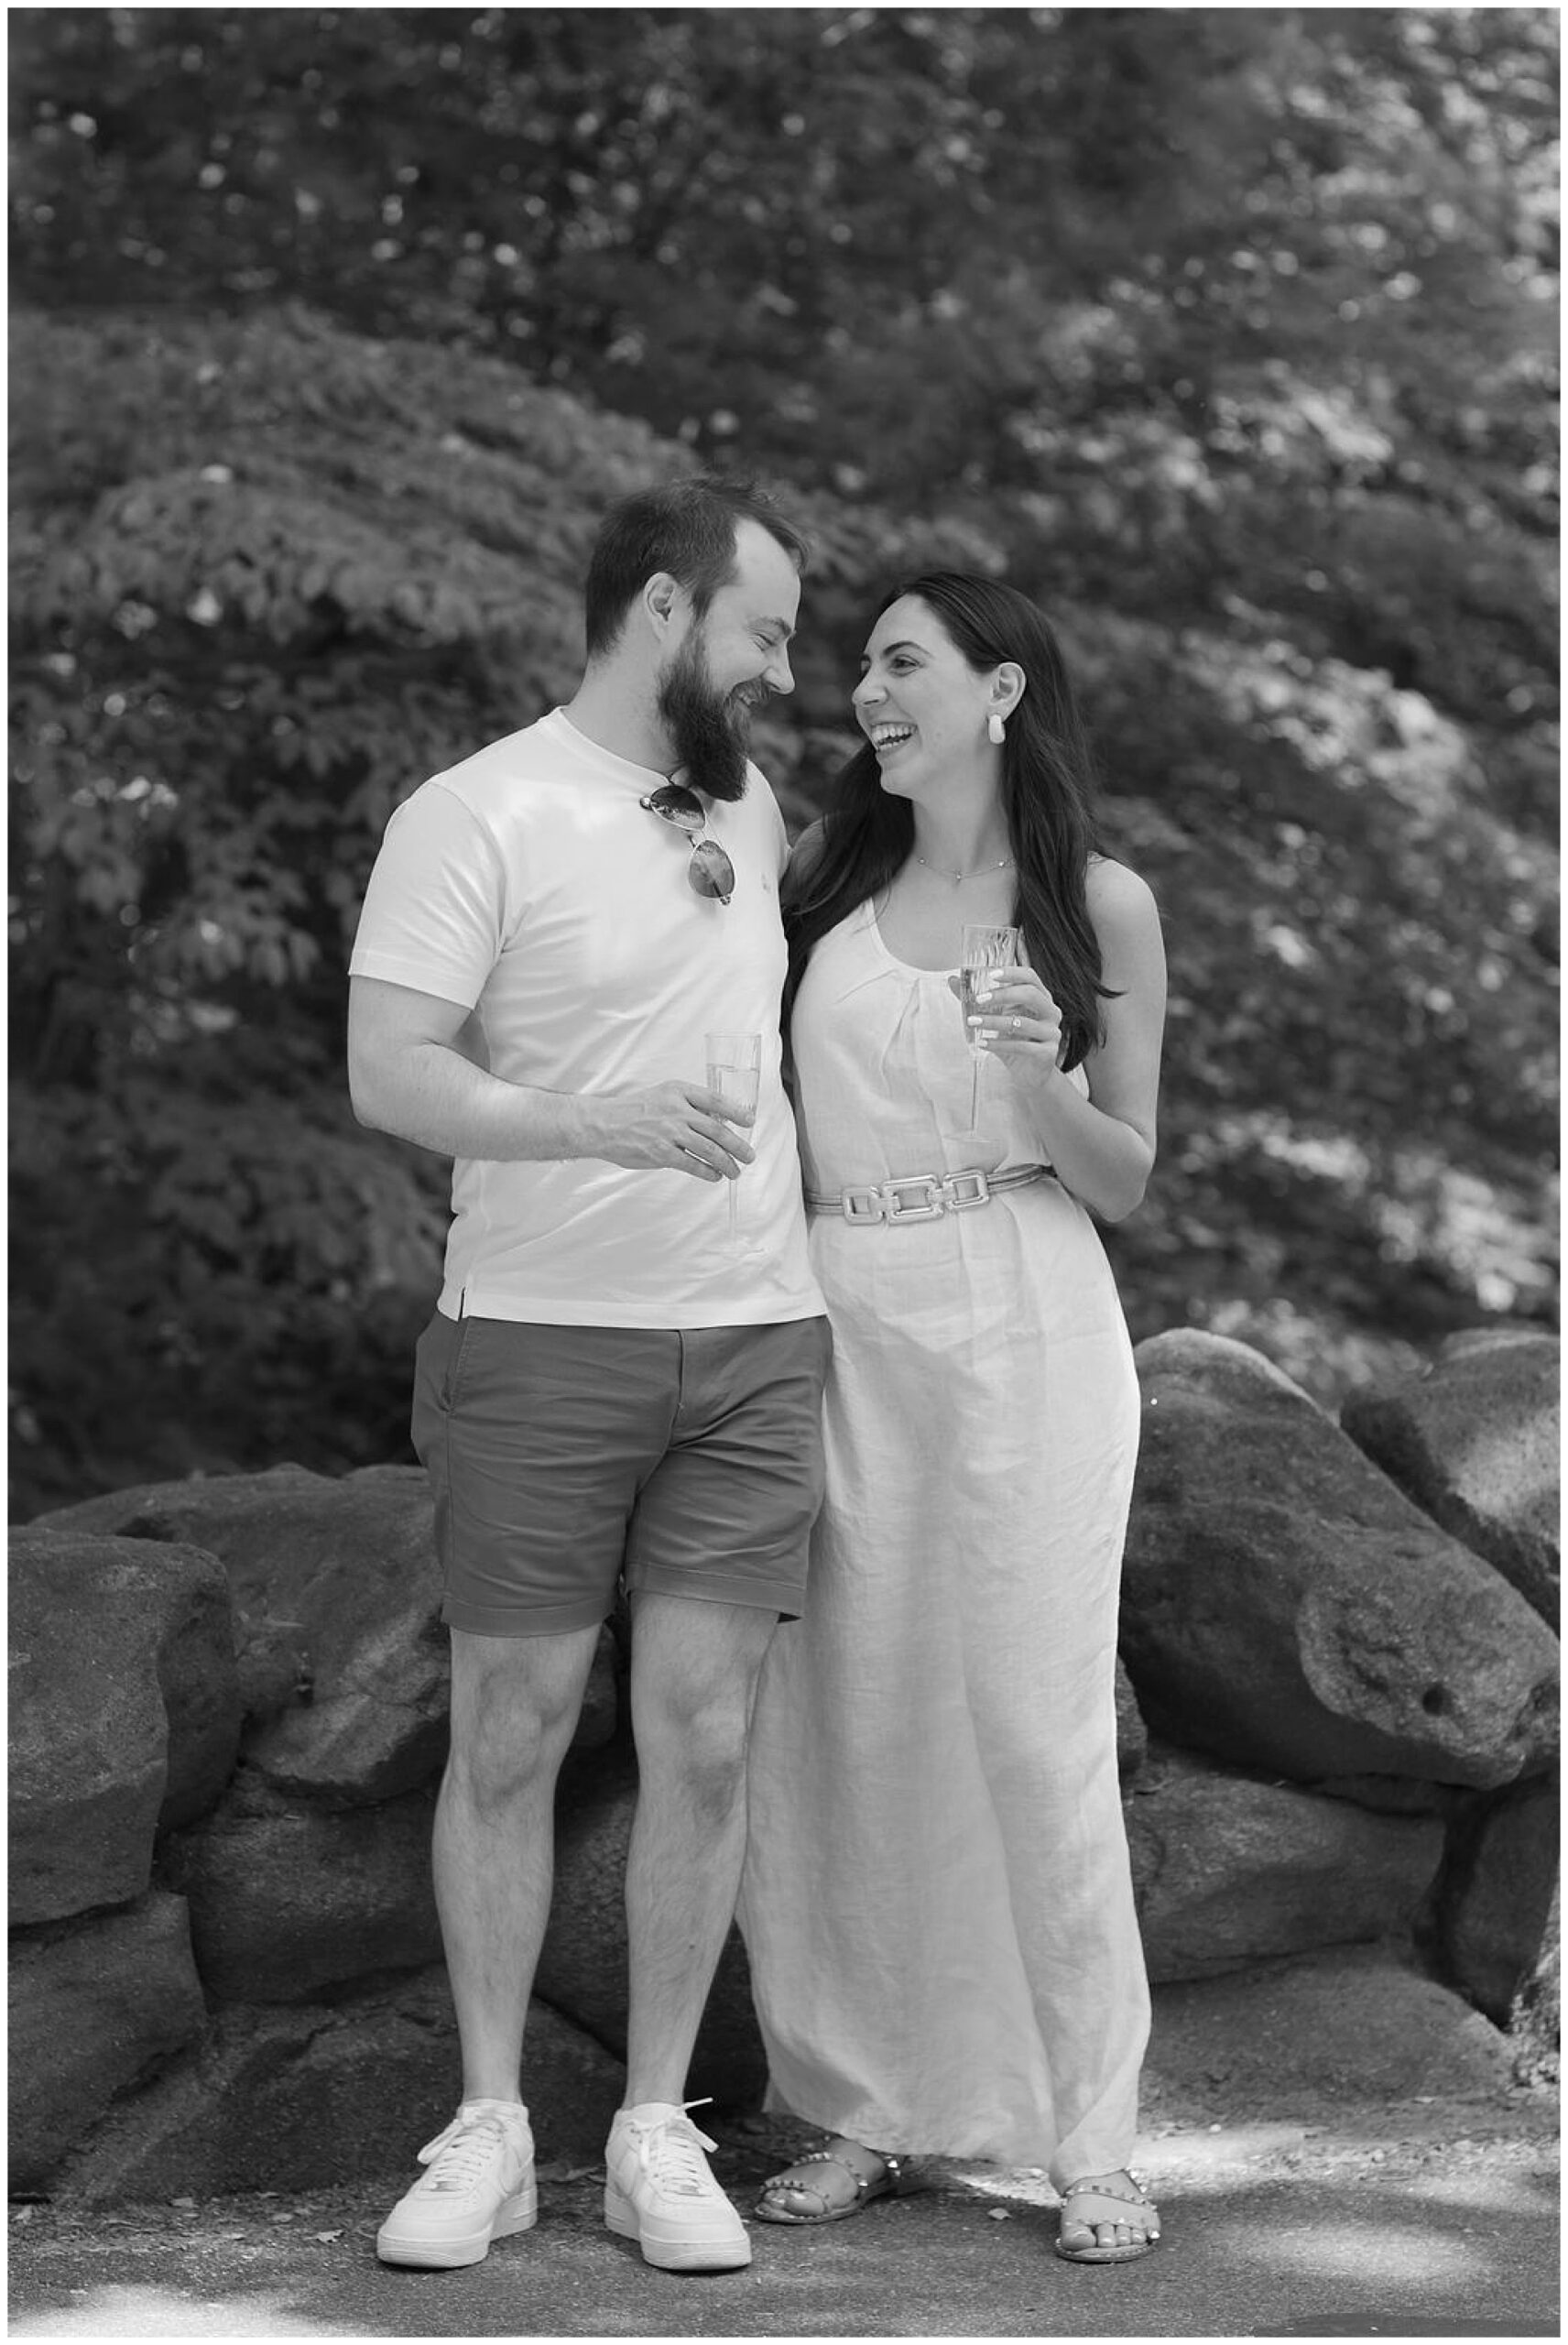 A newly engaged couple stands by some rocks in a park drinking champagne dc engagement photographer